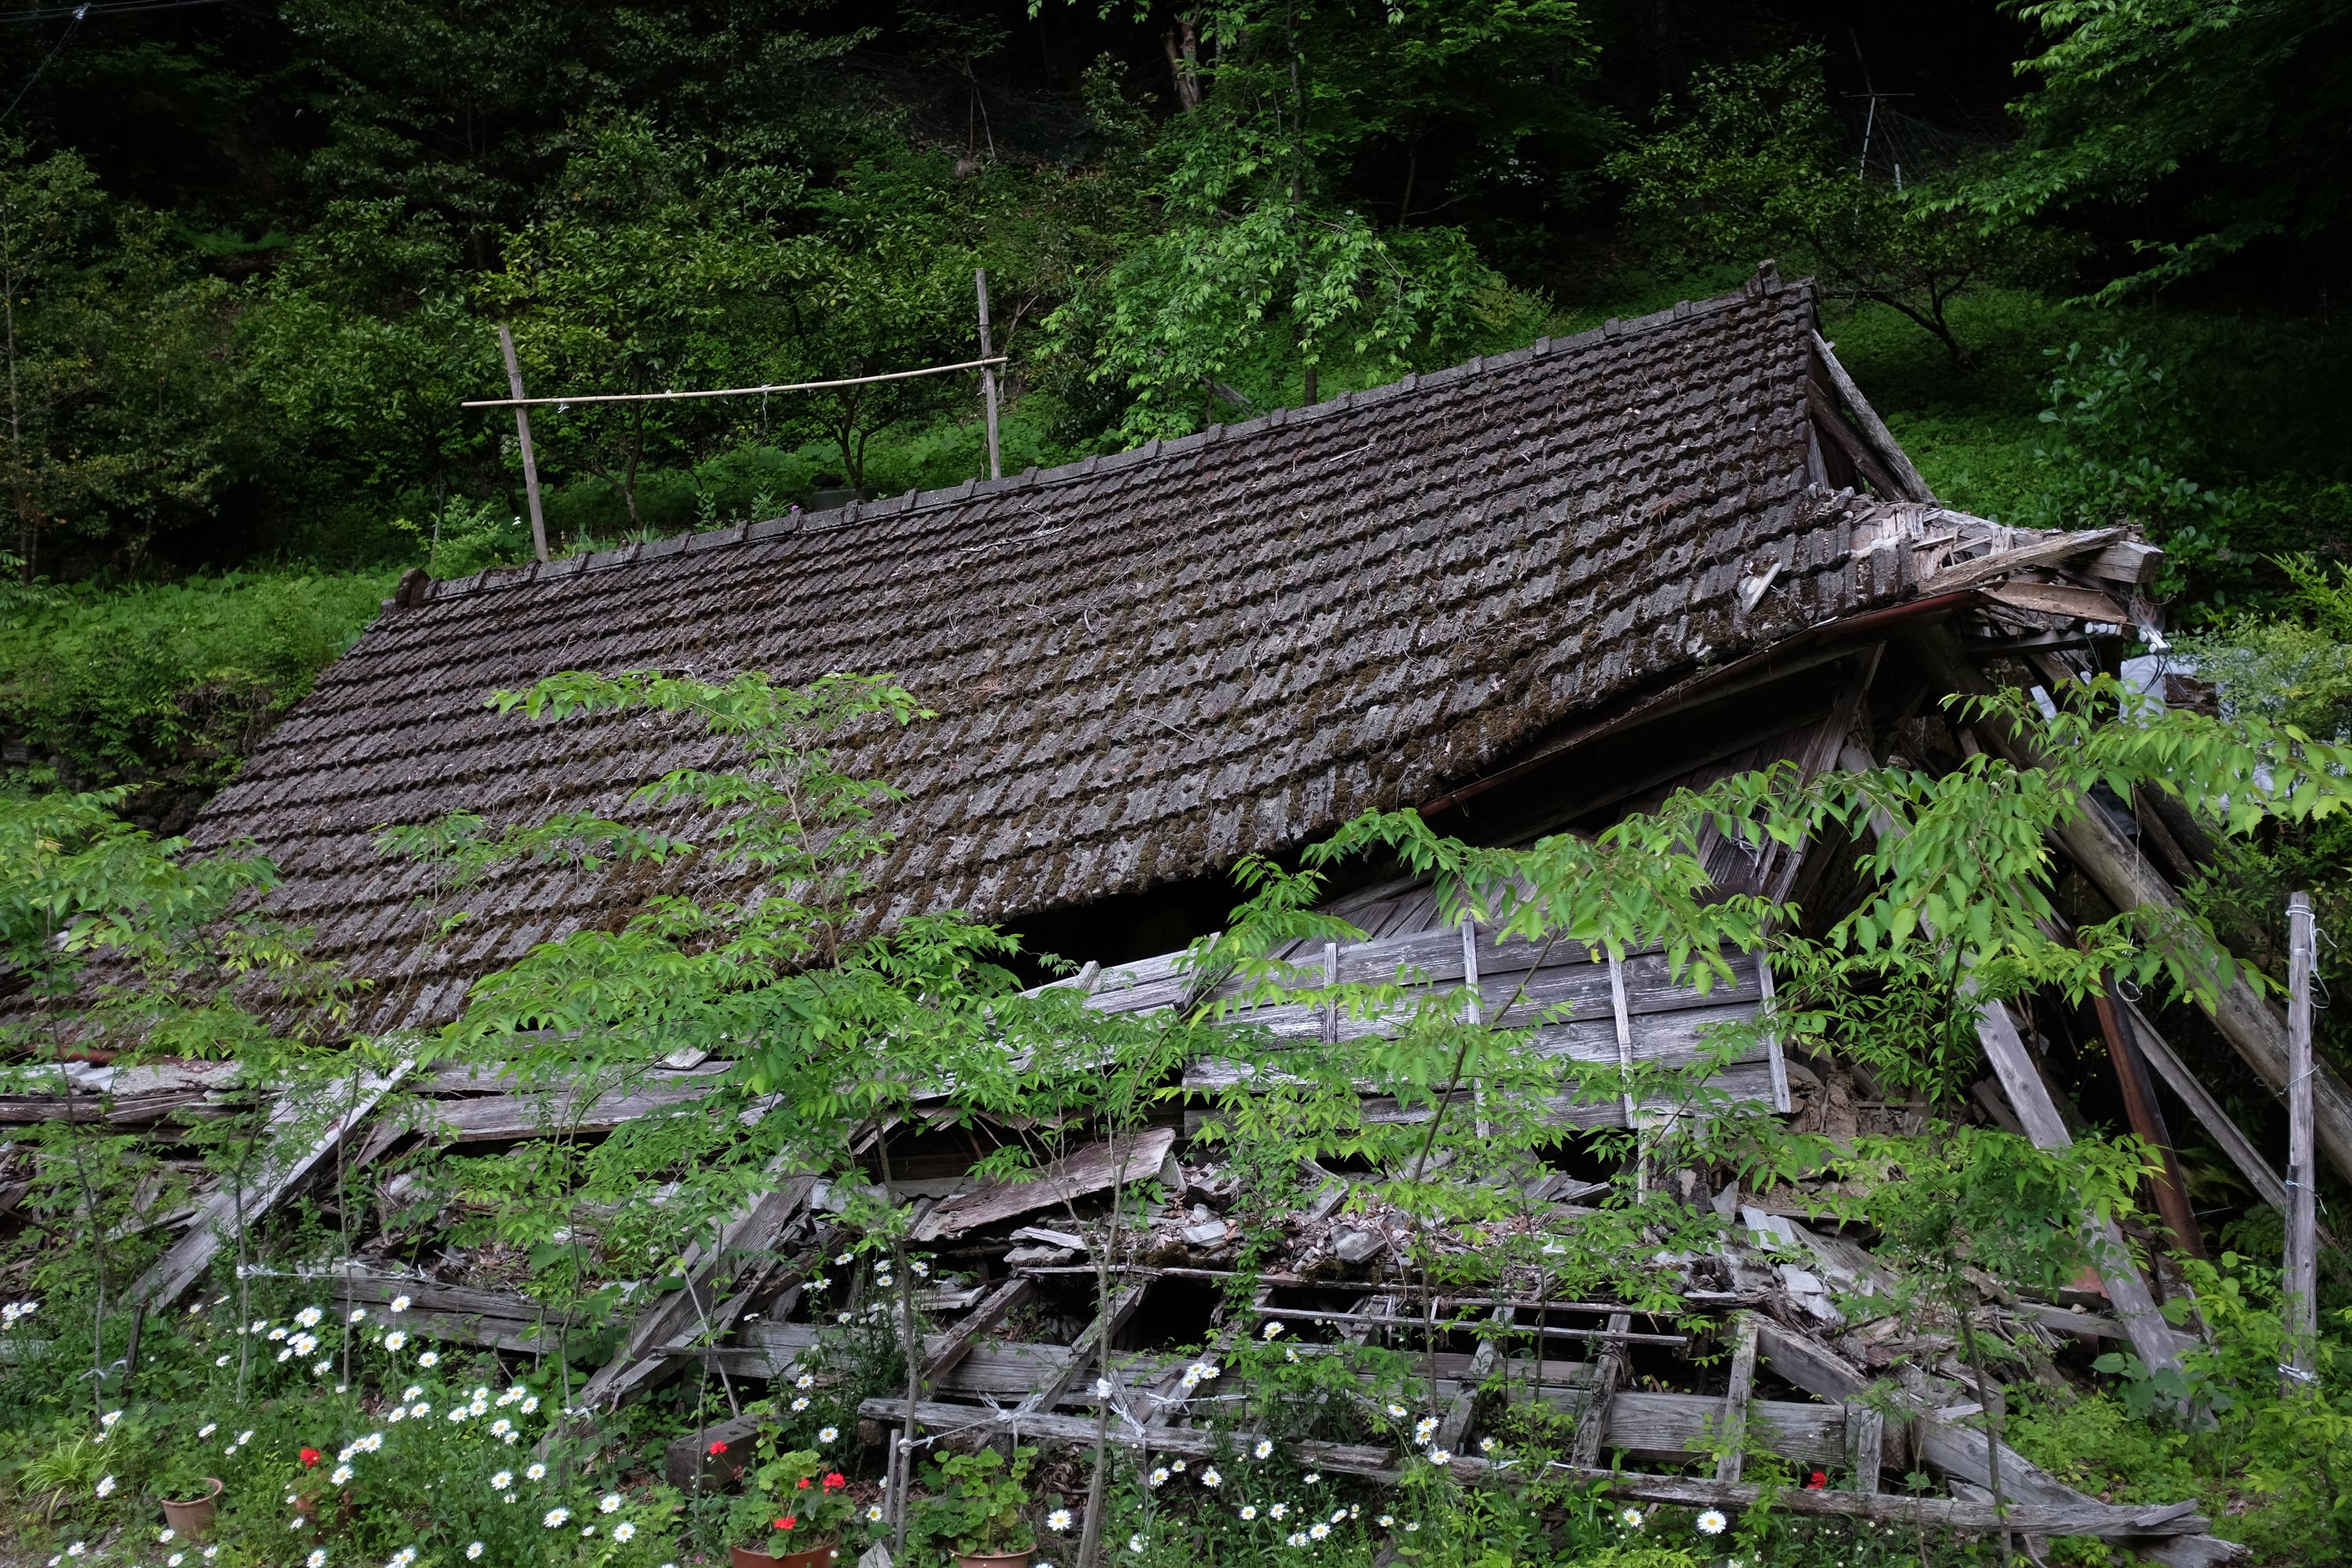 A collapsed Japanese house at the edge of the forest, surrounded on all sides by flowers and saplings.